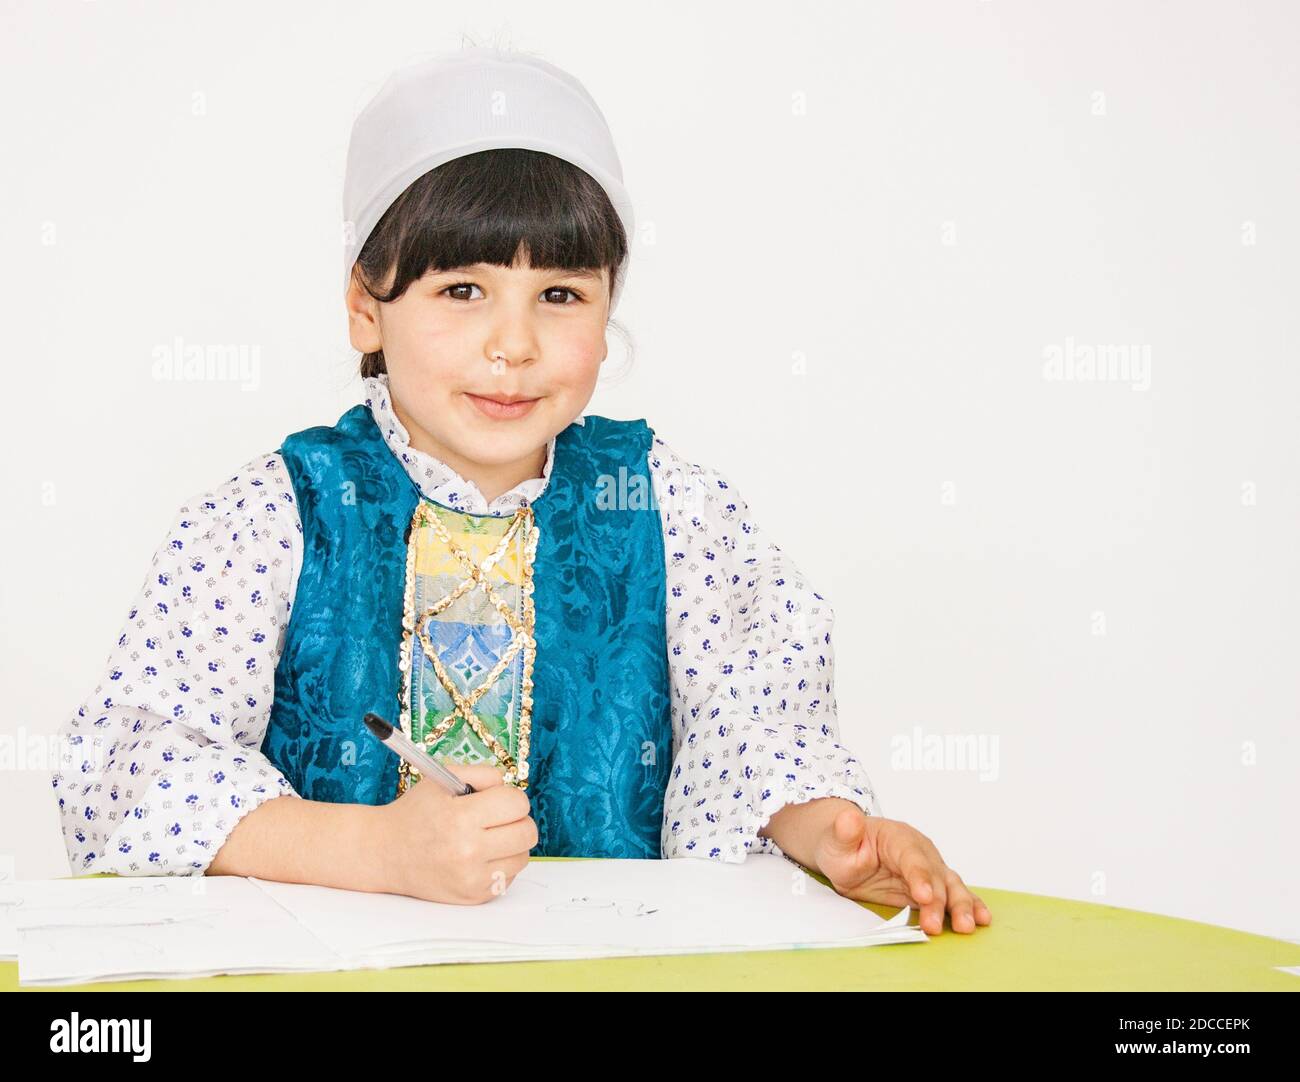 A little girl is sitting at a table, doing a drawing task, smiling and looking at the camera Stock Photo